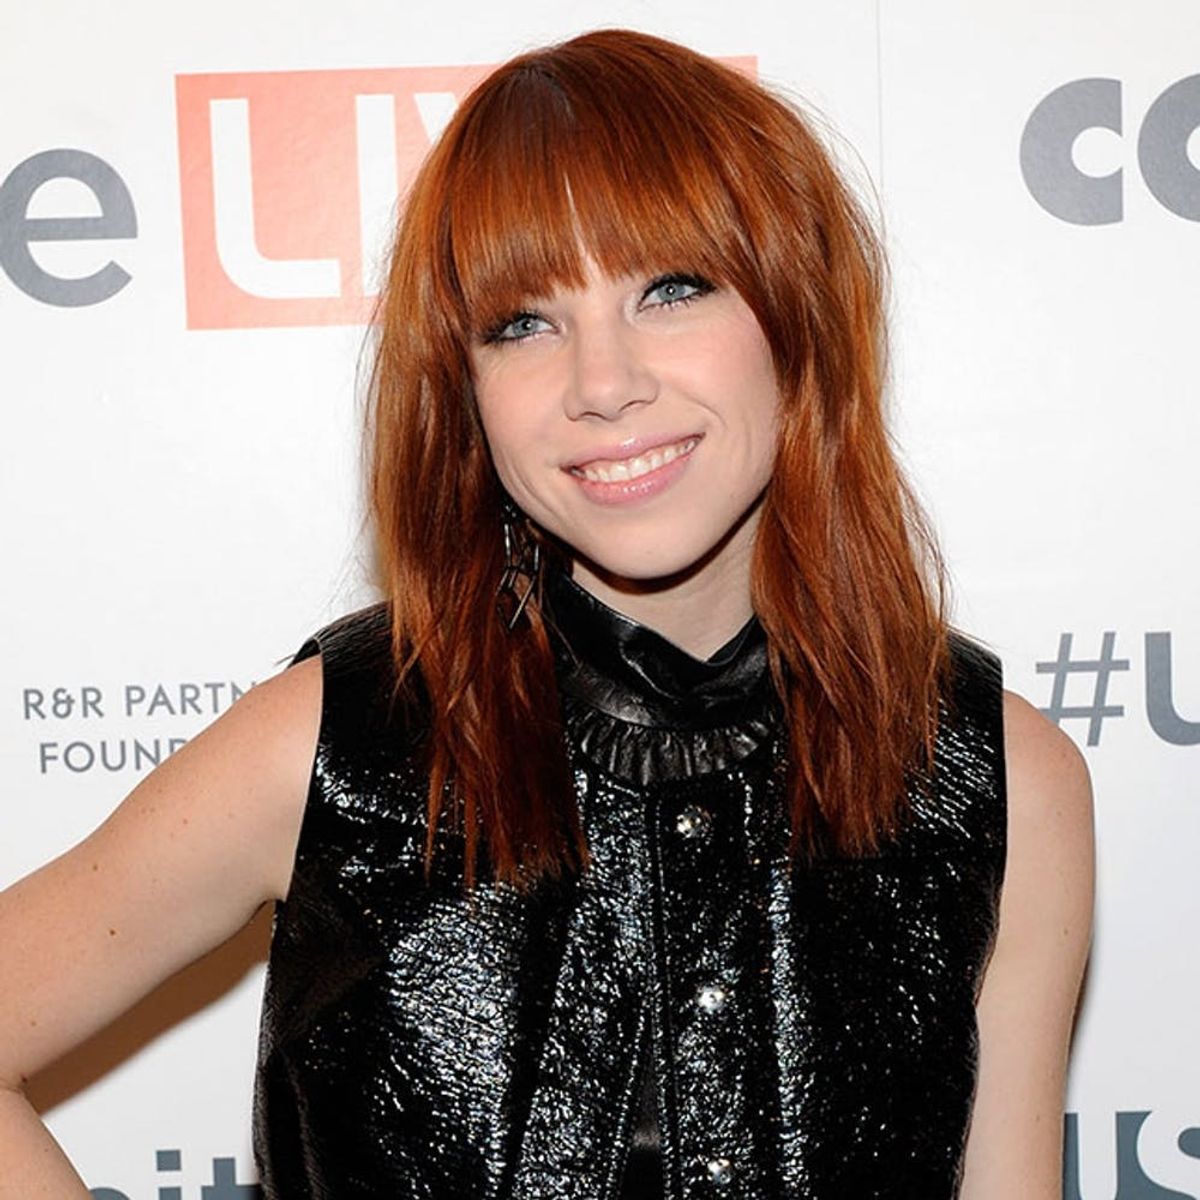 You Won’t Believe What Accessory Carly Rae Jepsen Is Trying to Make a Thing